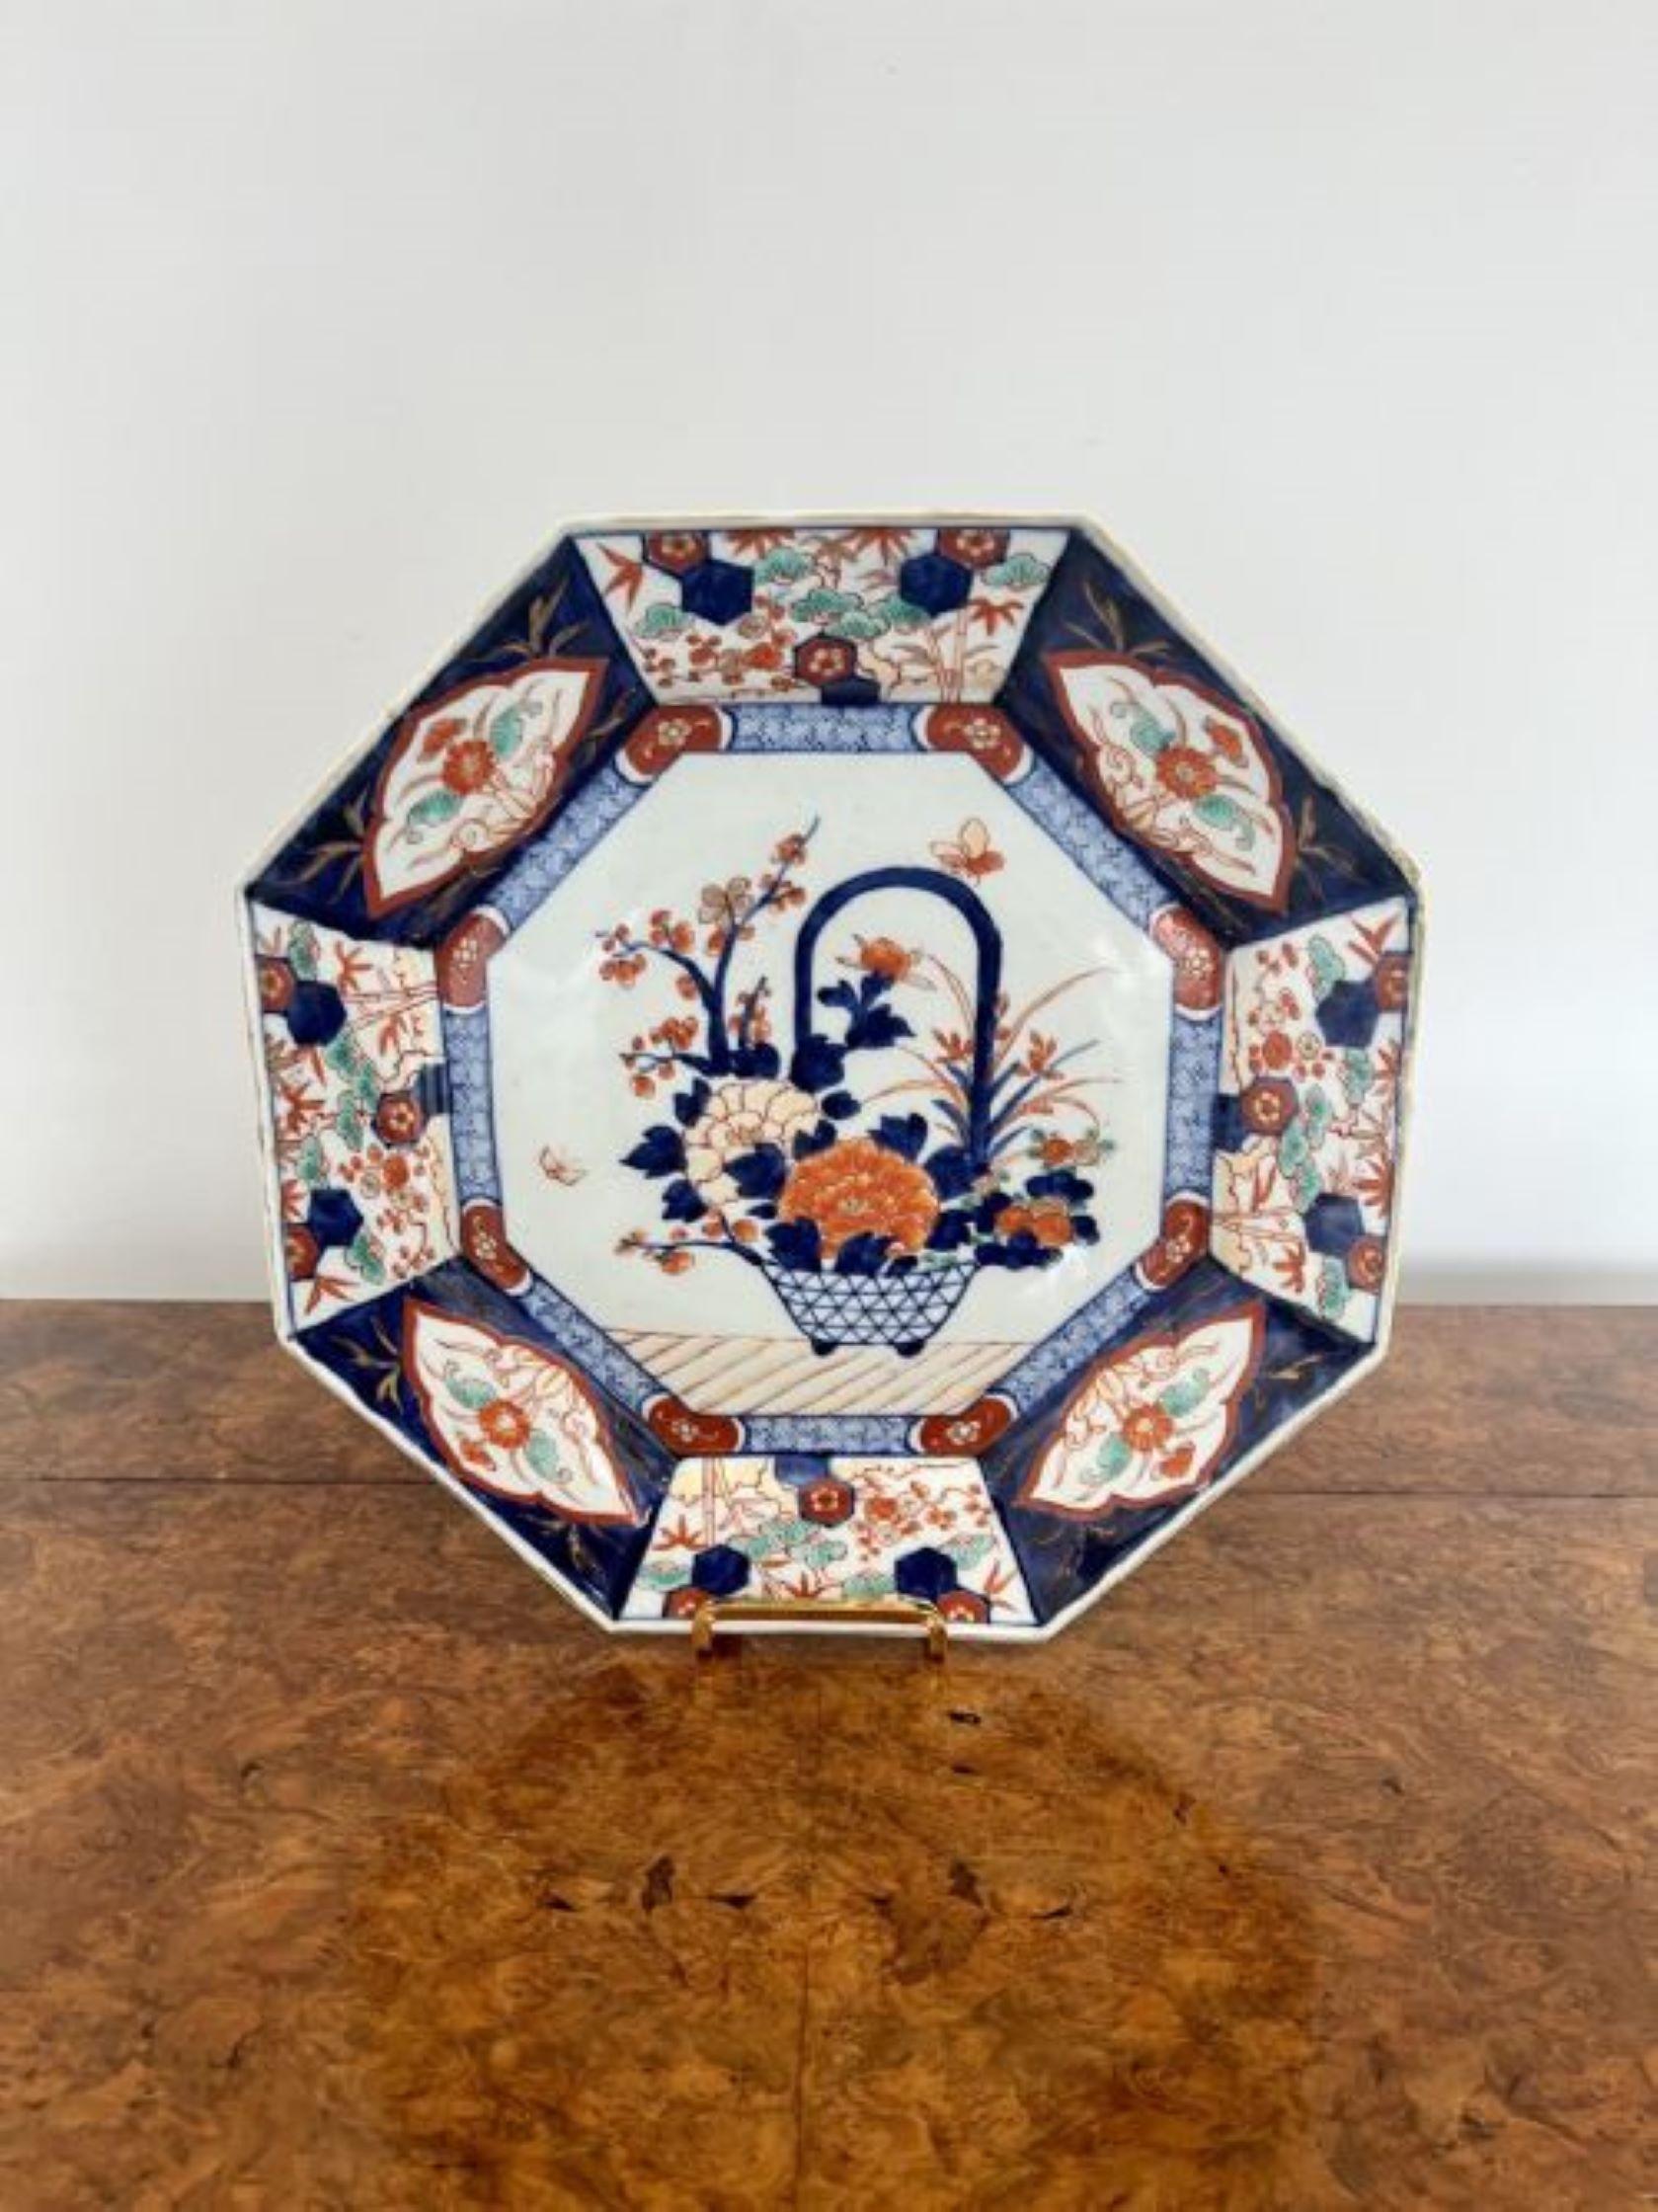 Unusual shaped antique Japanese Imari plate having an unusual shaped antique Japanese Imari plate with wonderful hand painted decoration having a basket of flowers to the centre surrounded by panels with flowers, leaves and scrolls in red, blue,